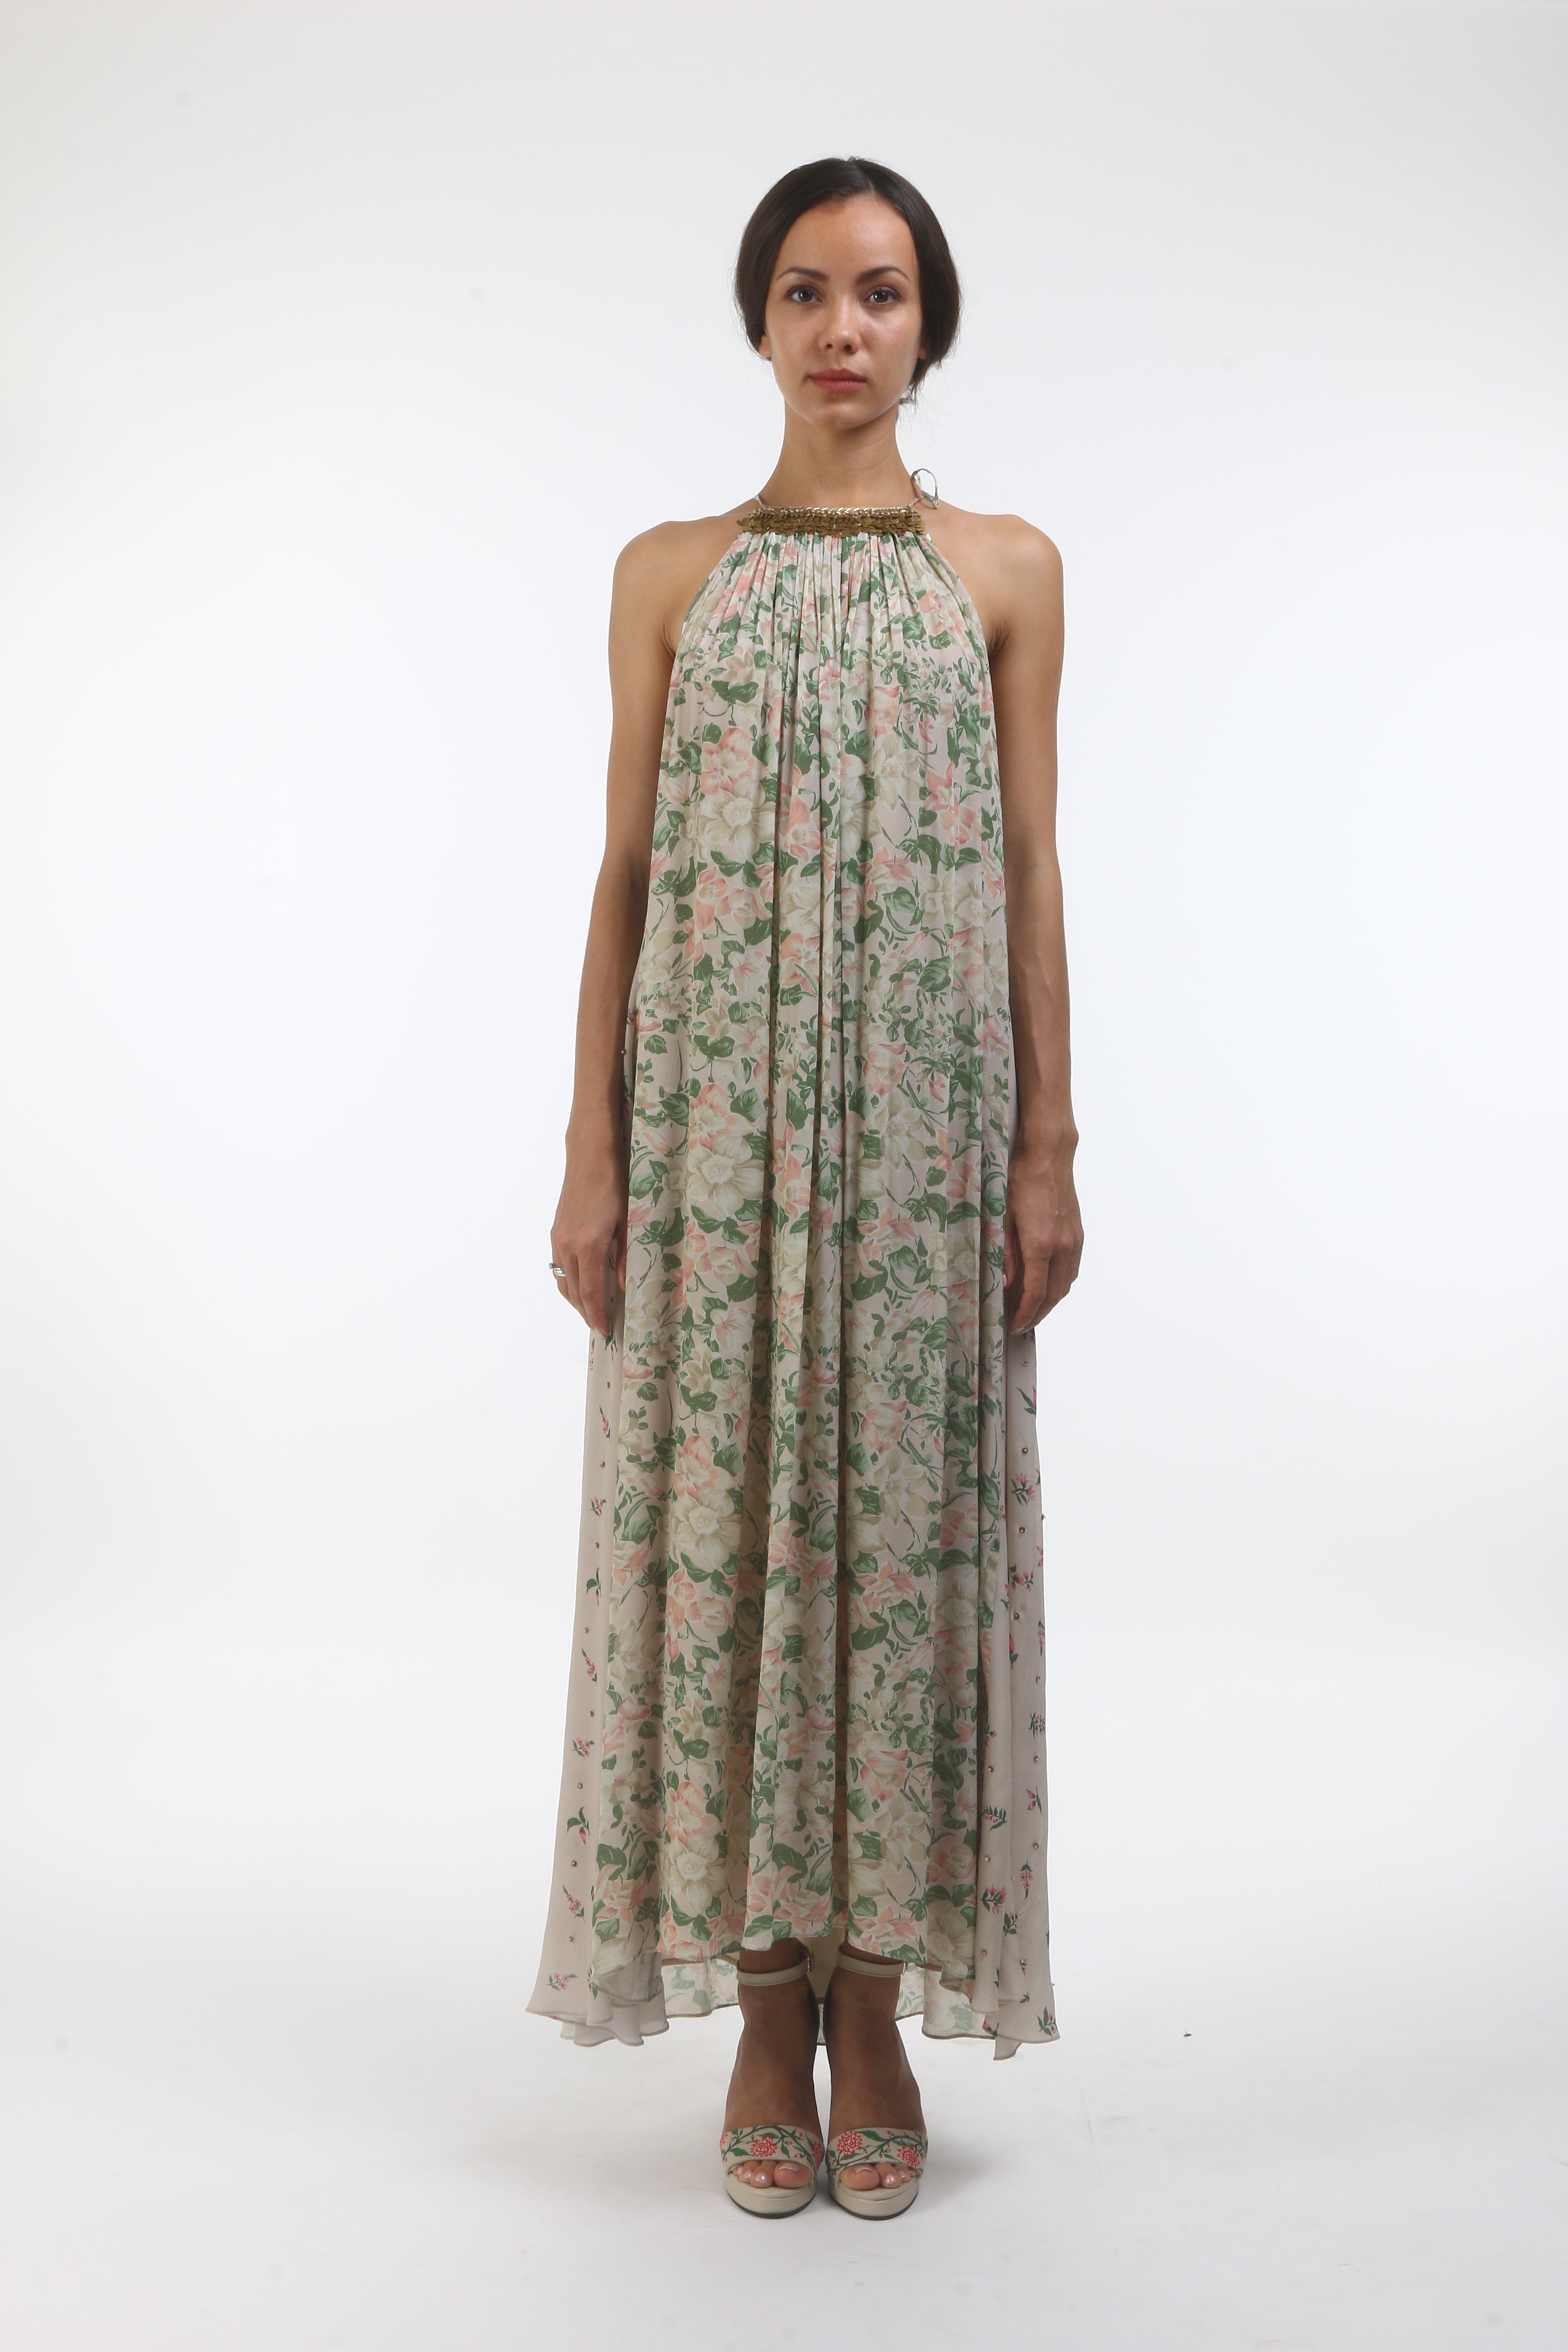 Bloom antique jade bibi jaal printed halter dress in crepe, with bouquet side godet’s and layered coin embroidered neckline.